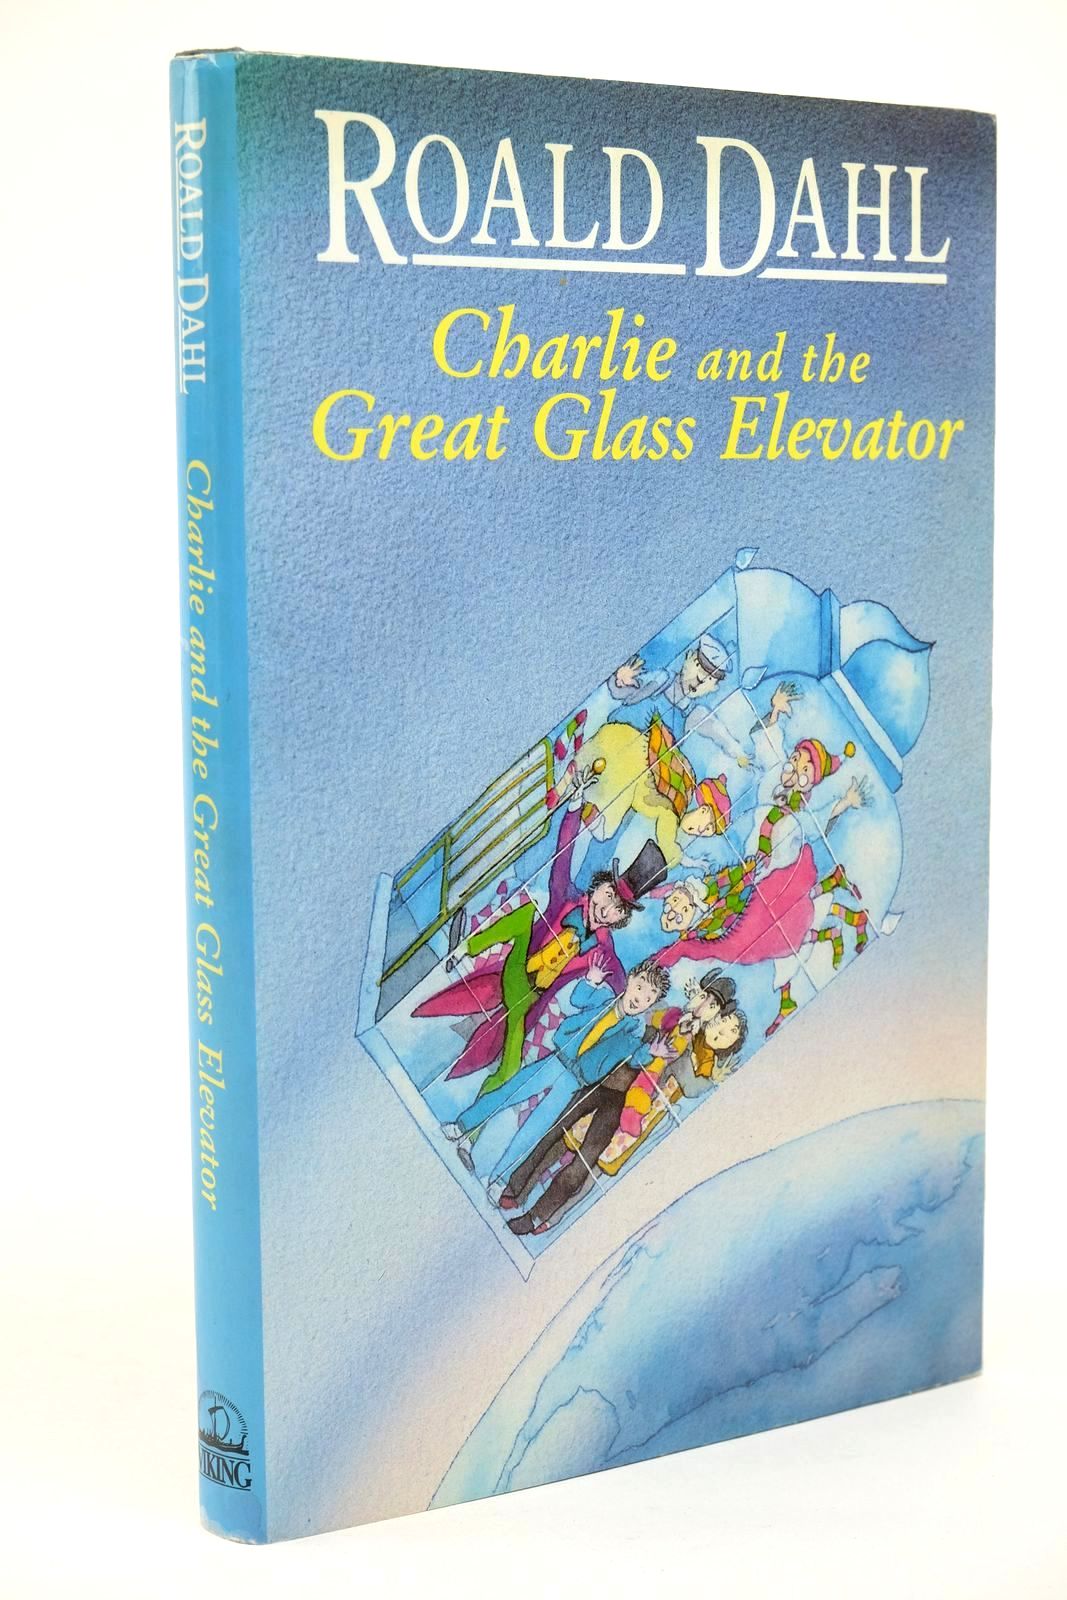 Photo of CHARLIE AND THE GREAT GLASS ELEVATOR written by Dahl, Roald illustrated by Foreman, Michael published by Viking (STOCK CODE: 1323046)  for sale by Stella & Rose's Books